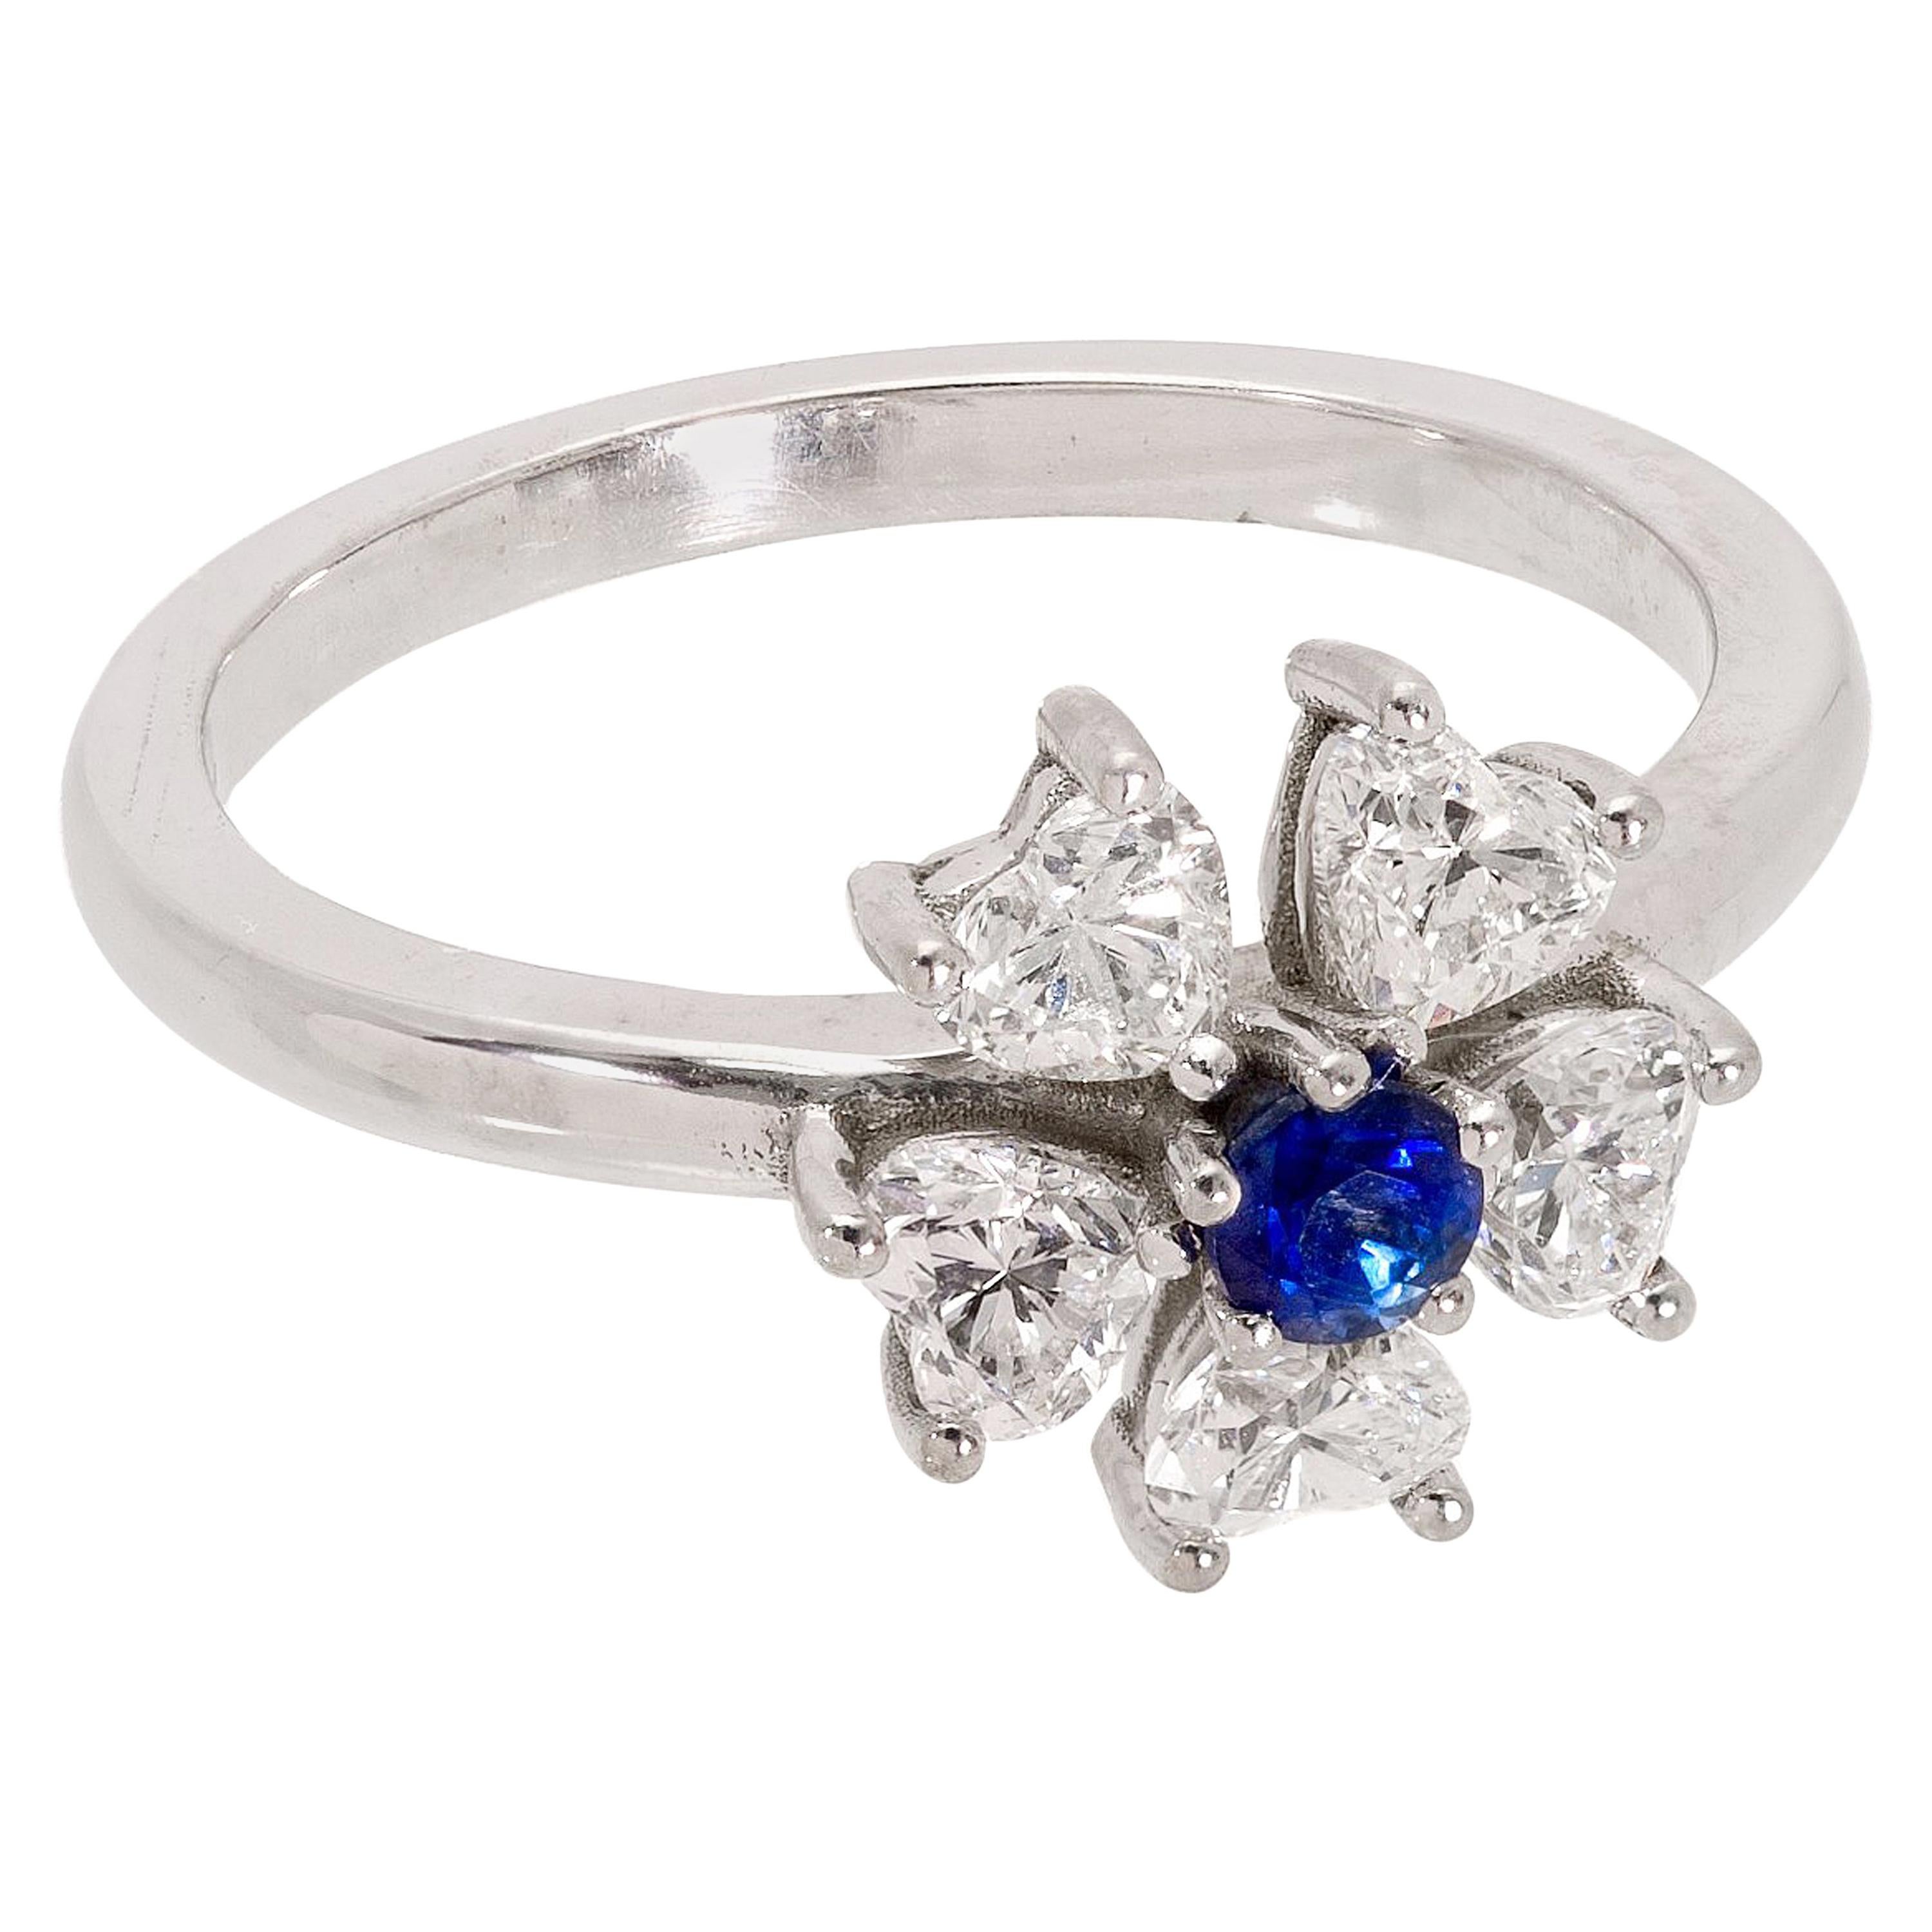 For Sale:  Floral Motif Diamond Ring with Ideal Cut Heart Shaped Diamonds